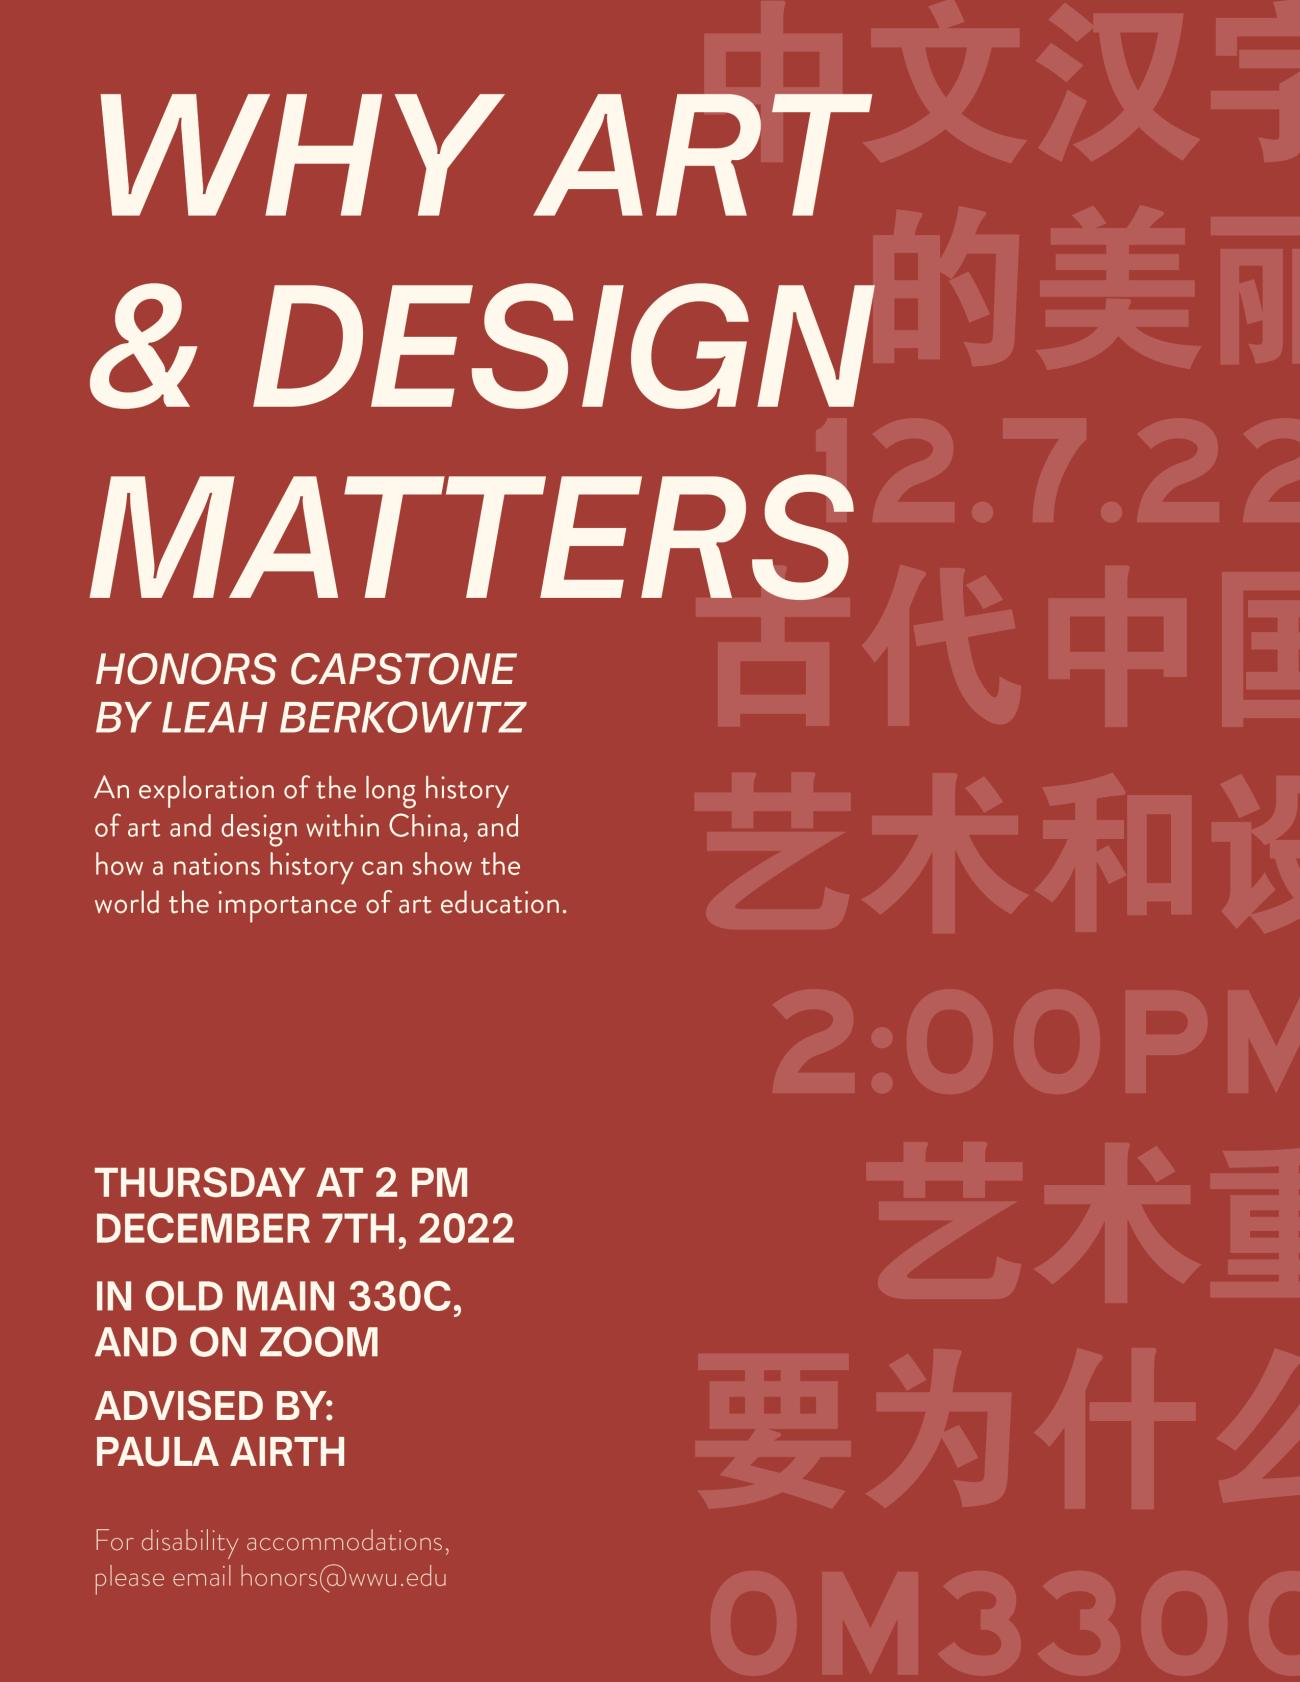 A red poster with Chinese characters in the background. The text reads: "Why Art & Design Matters," Honors Capstone by Leah Berkowitz. An exploration of the long history of art and design within China, and how a nation's history can show the world the importance of art education. Thursday at 10 am December 7th, 2022. OM330C and on zoom. Advised by Paula Airth. For disability accommodations, please email honors@wwu.edu." 